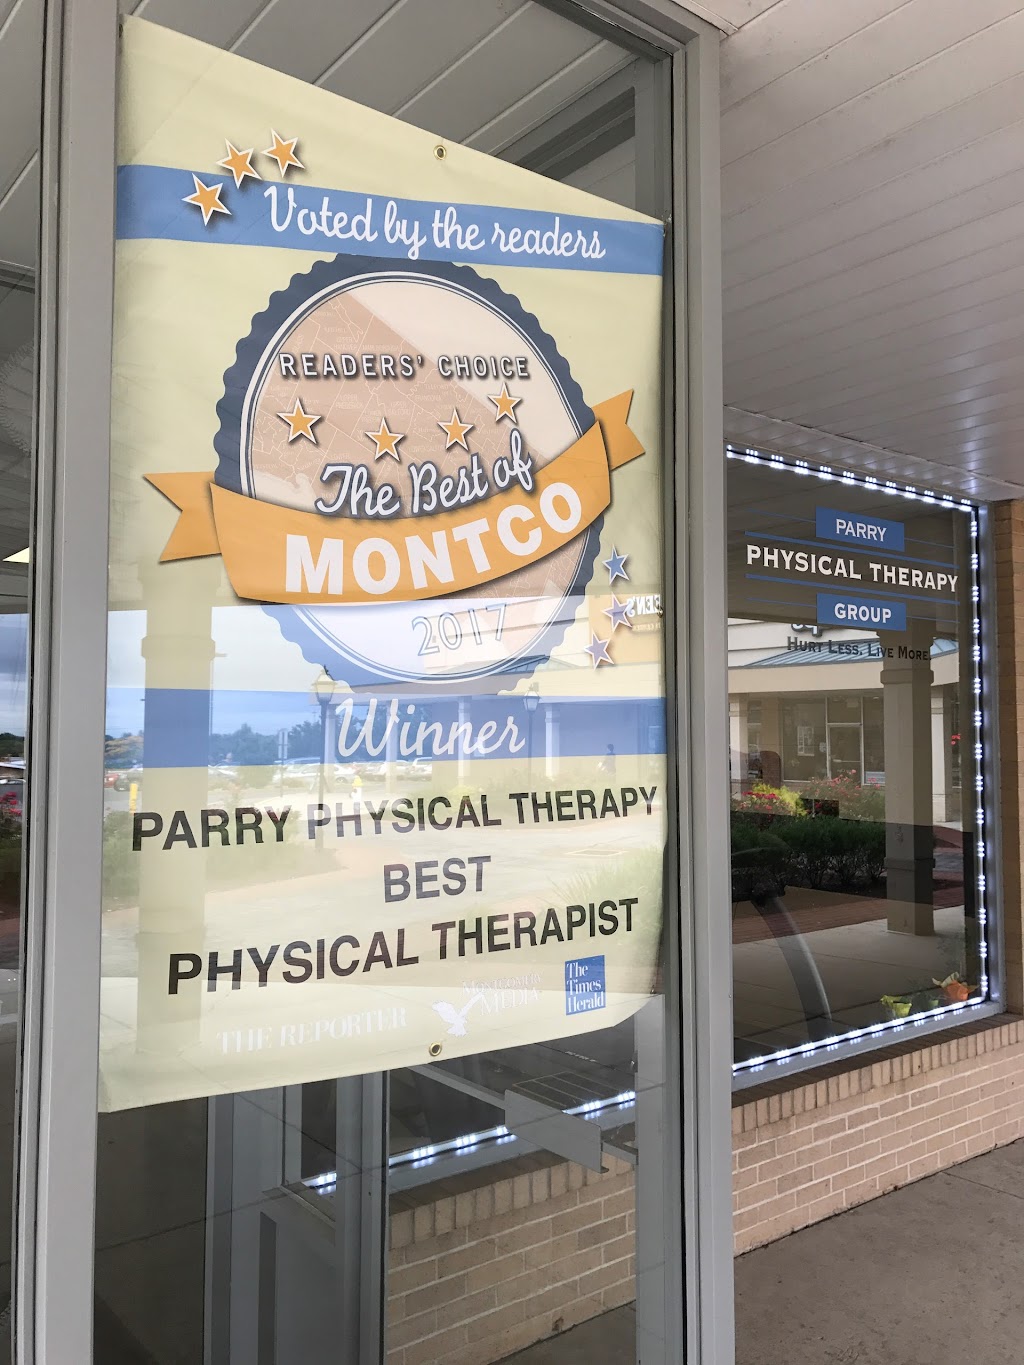 Parry Physical Therapy Group | 608 E Main St, Lansdale, PA 19446 | Phone: (215) 538-1999